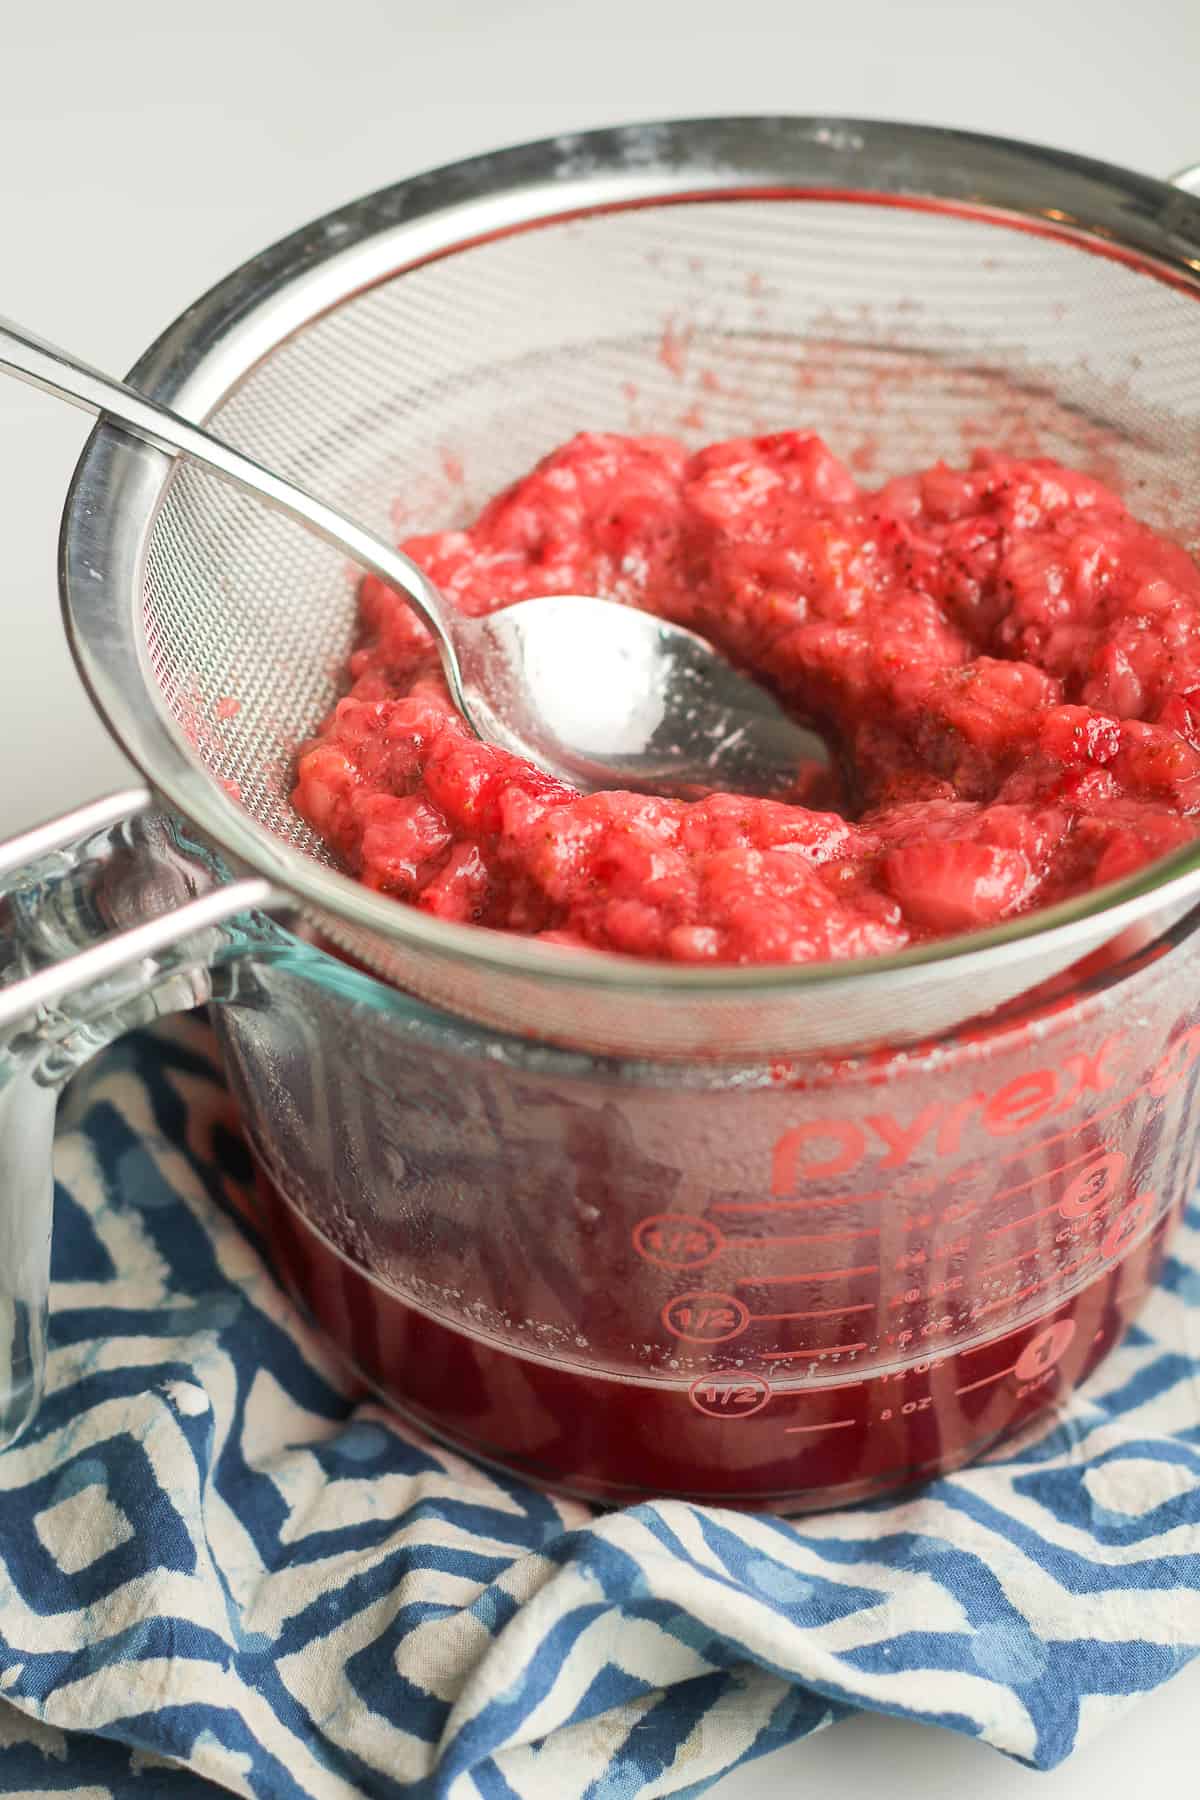 Strawberries in a fine mesh strainer over a measuring cup.